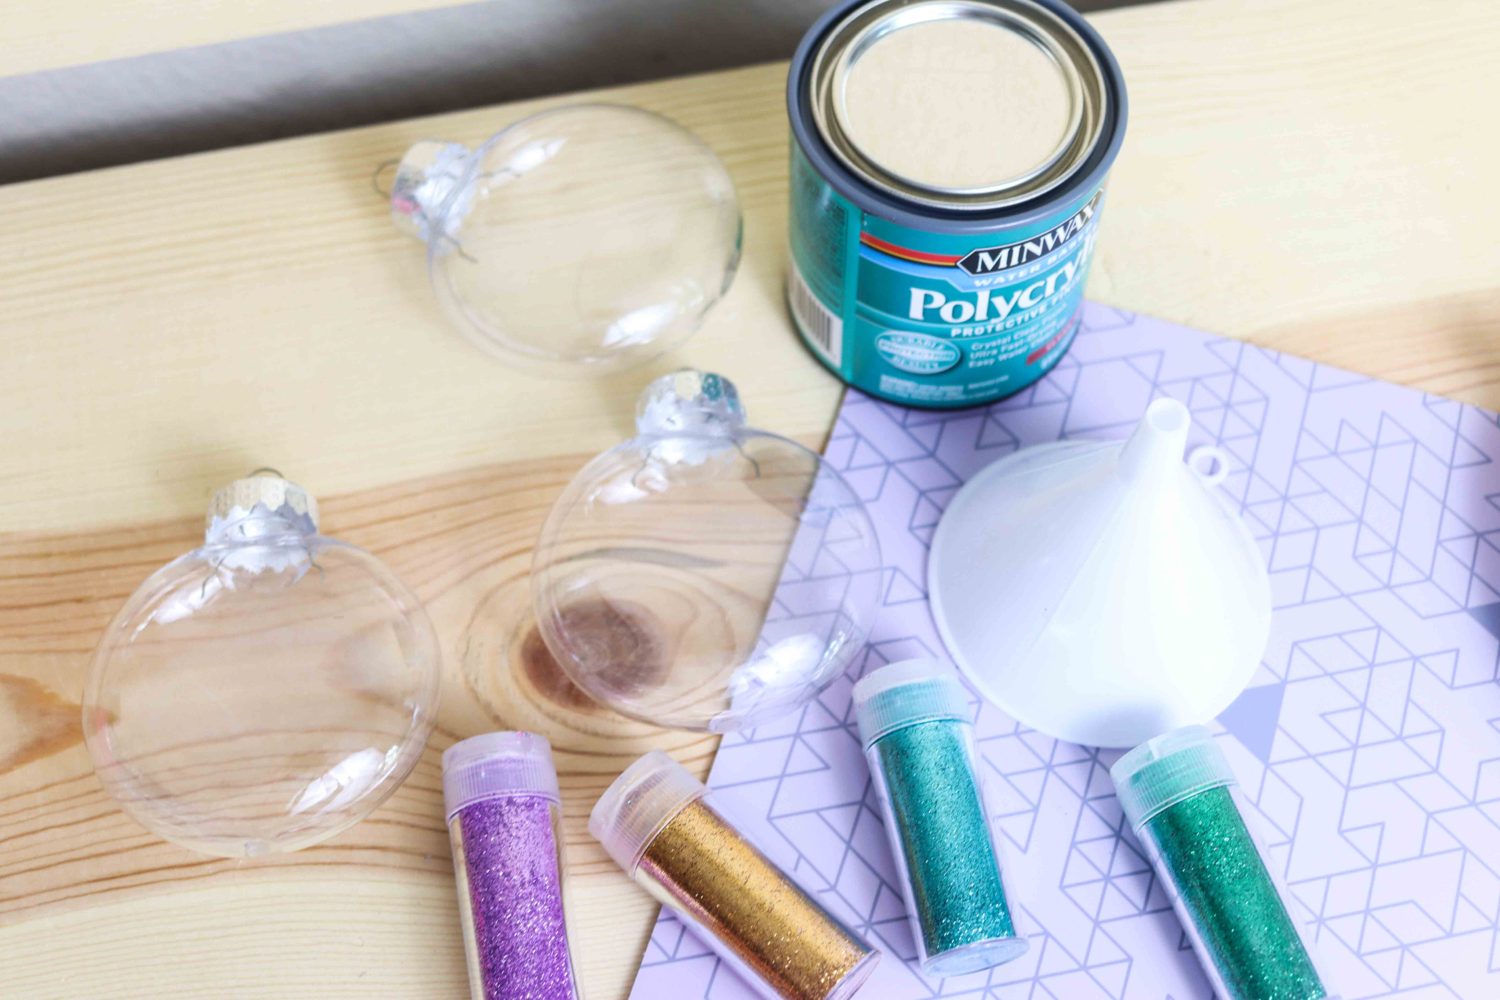 Materials needed to make glitter ornaments